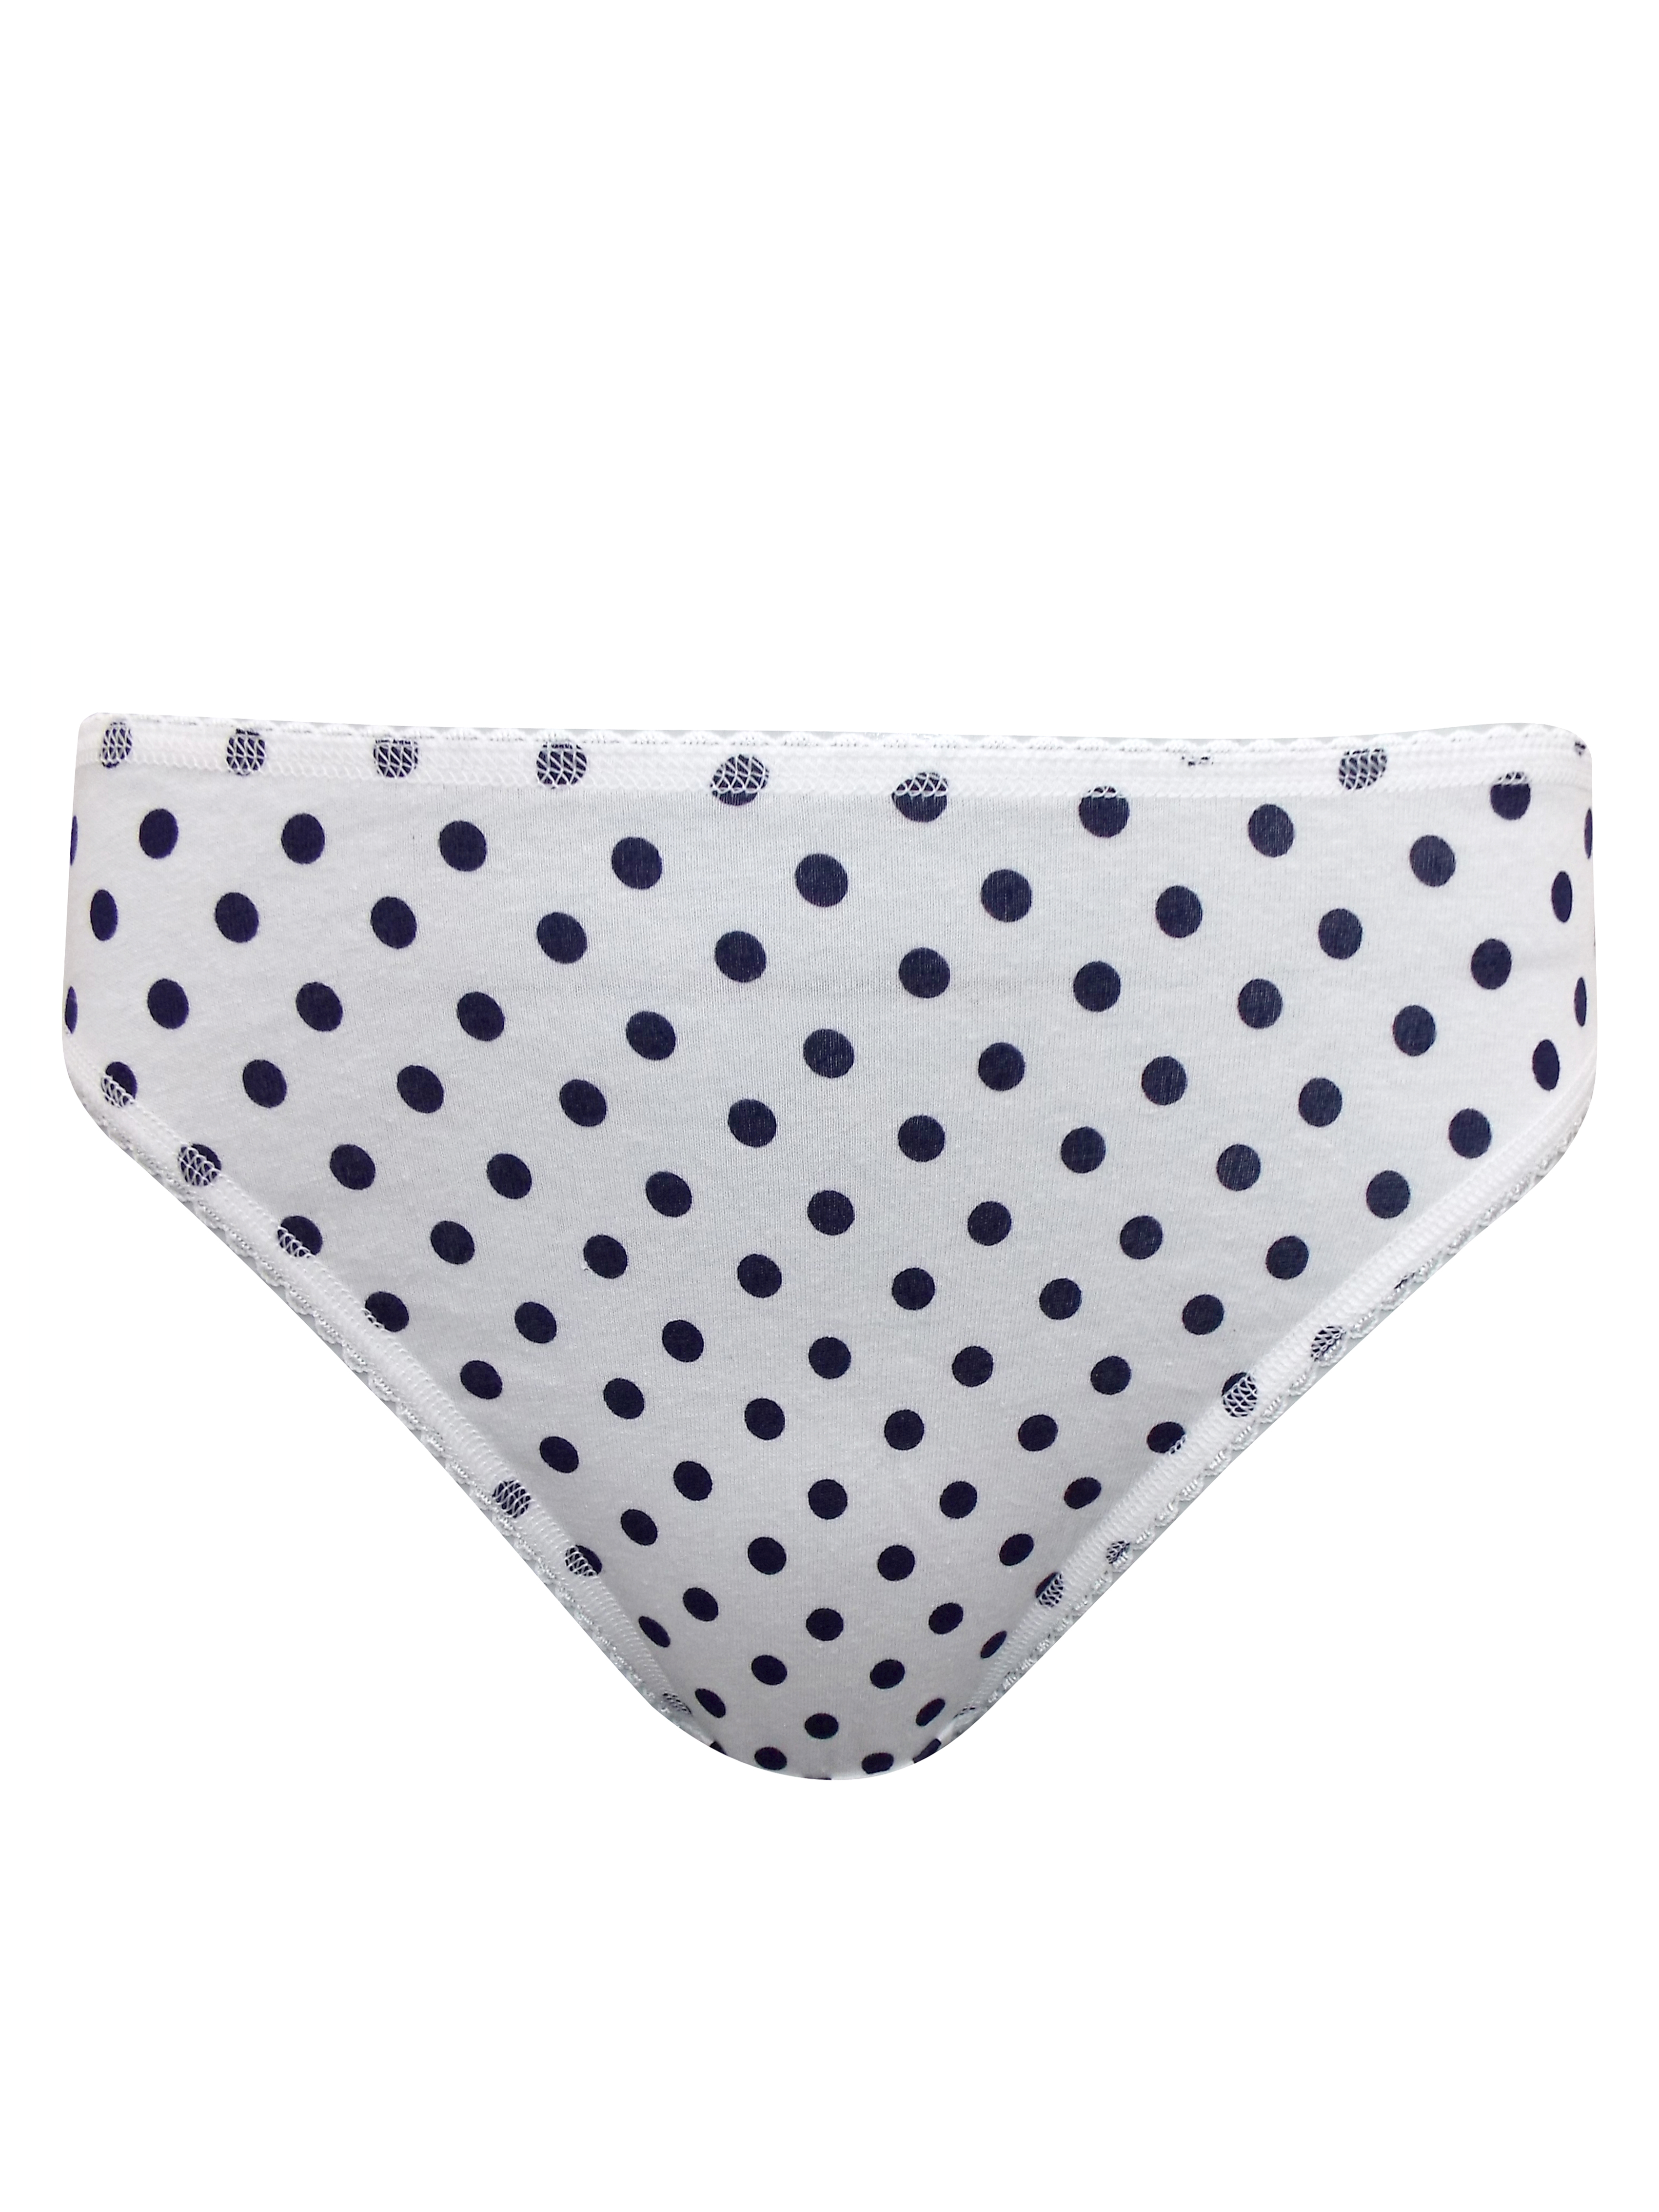 MARKS AND SPENCER COTTON COMFORT & FIT SOFT LILAC  SPOTTED  HIGH LEG BRIEFS